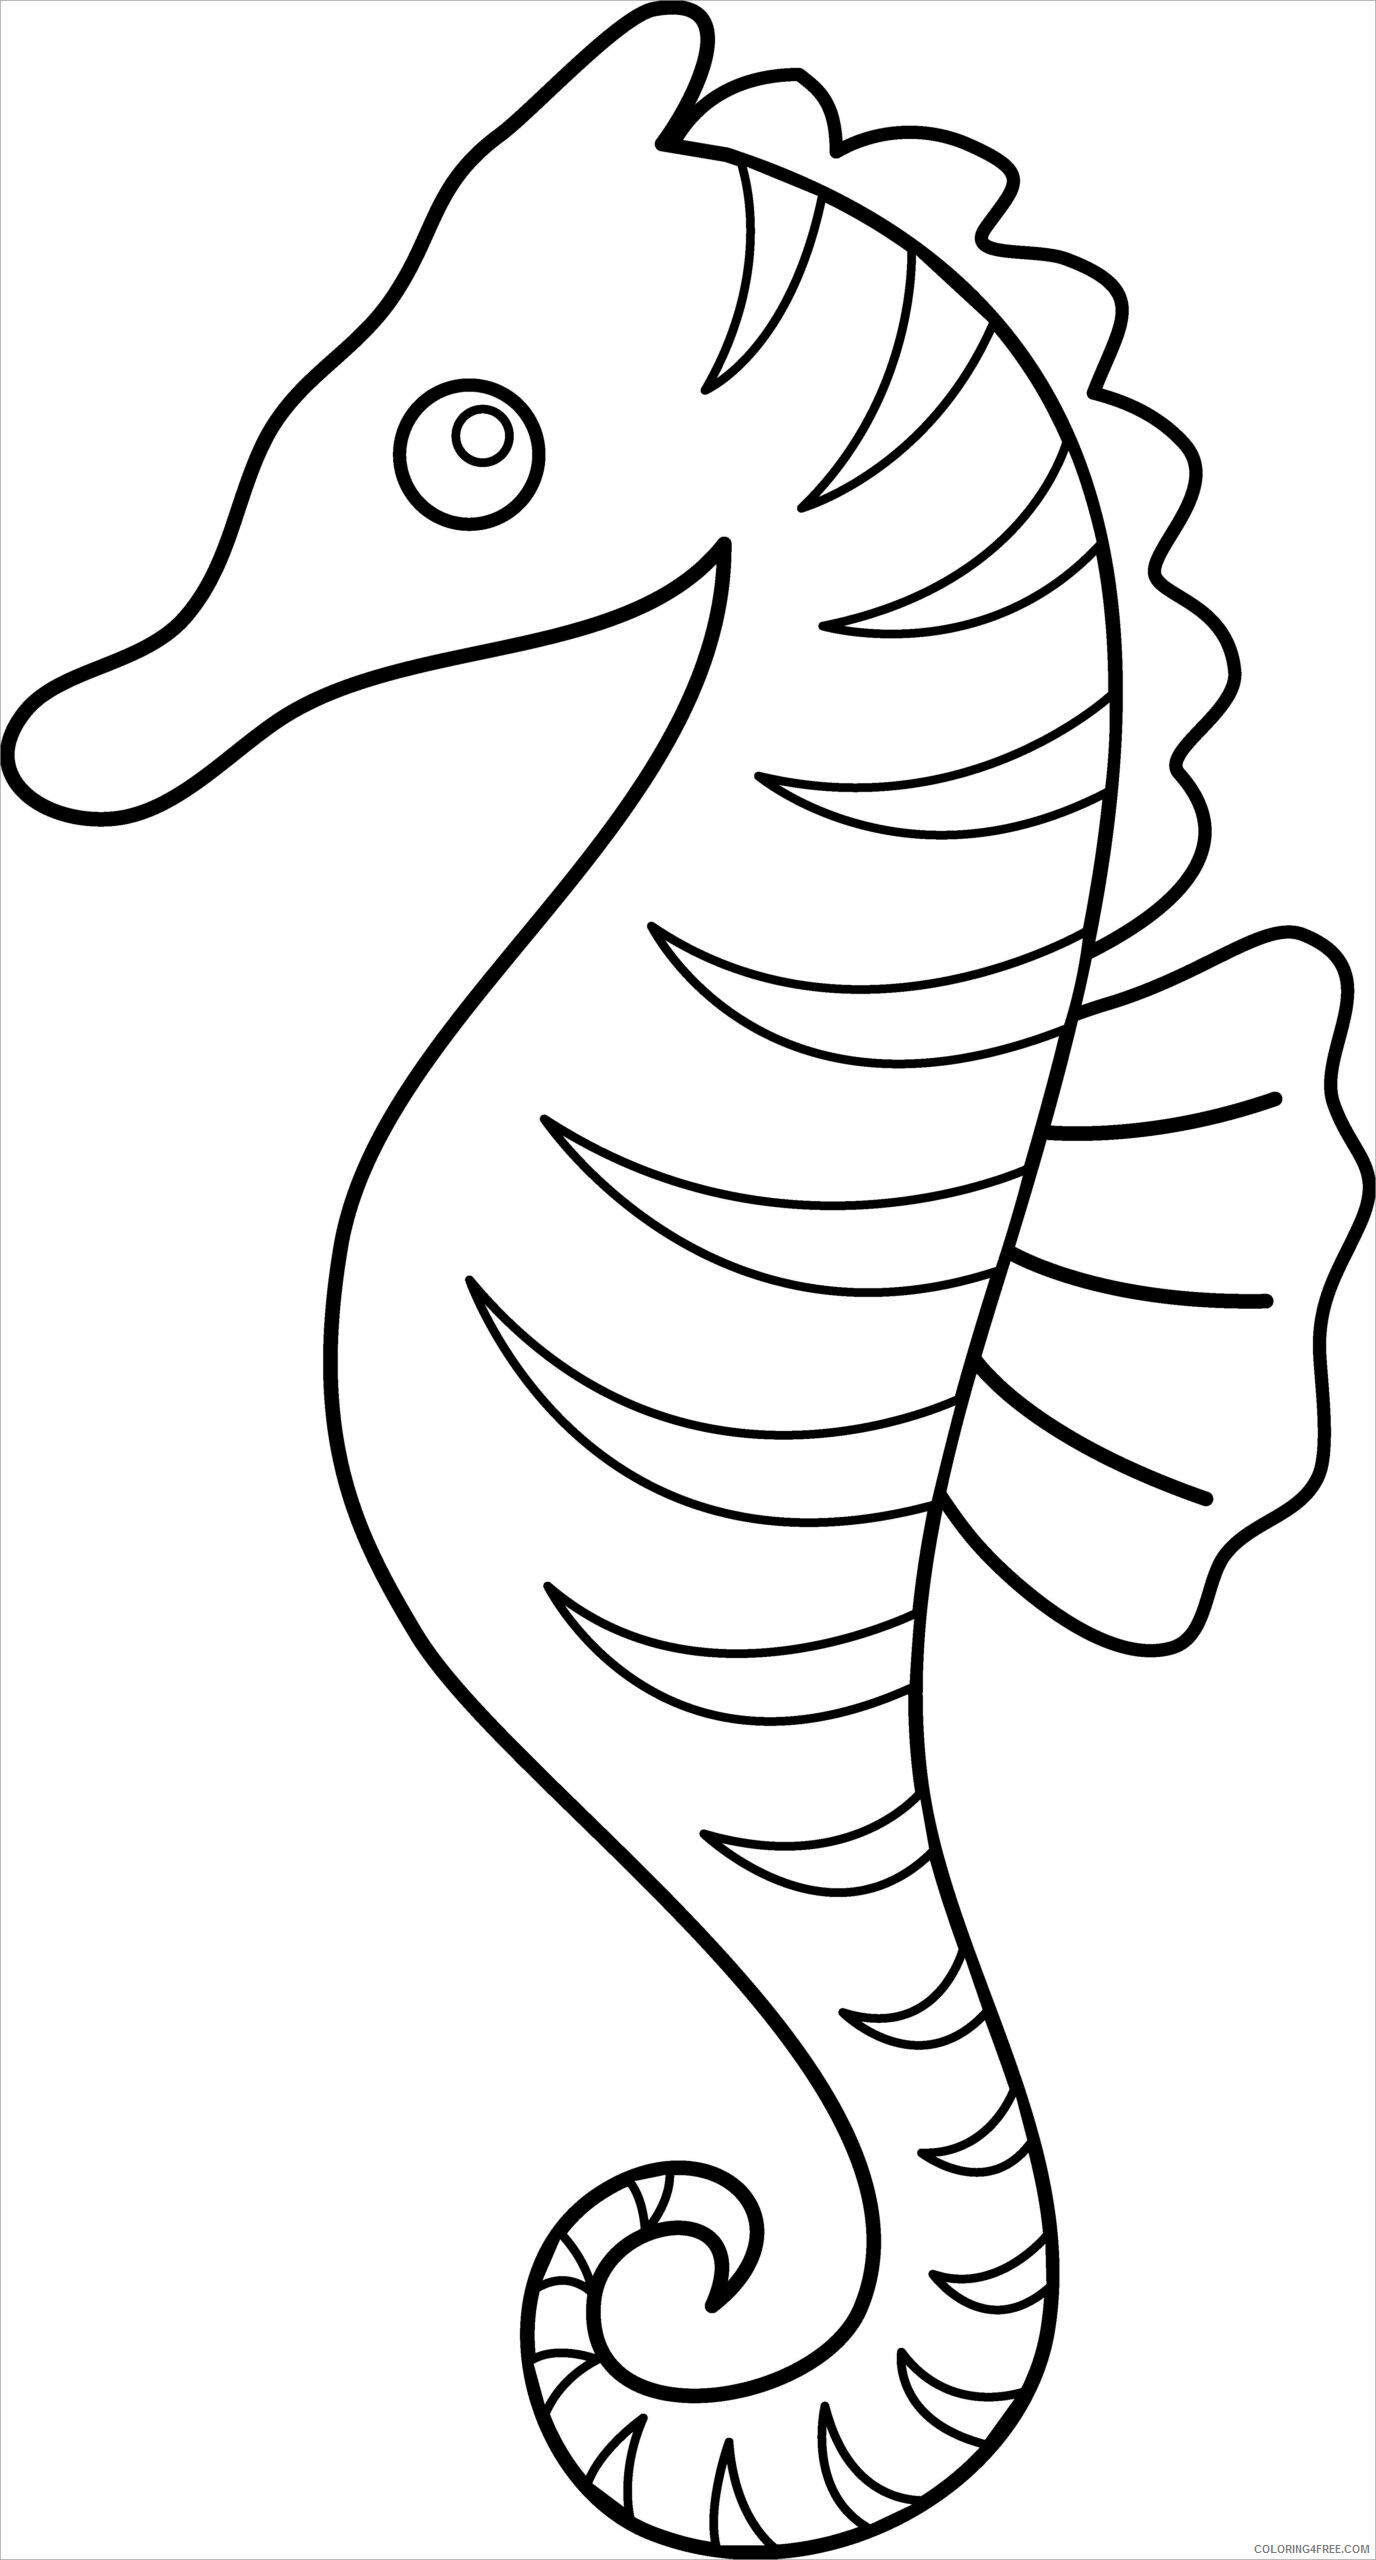 Seahorse Coloring Pages Animal Printable Sheets Cute Baby Seahorse 2021 4381 Coloring4free Coloring4free Com